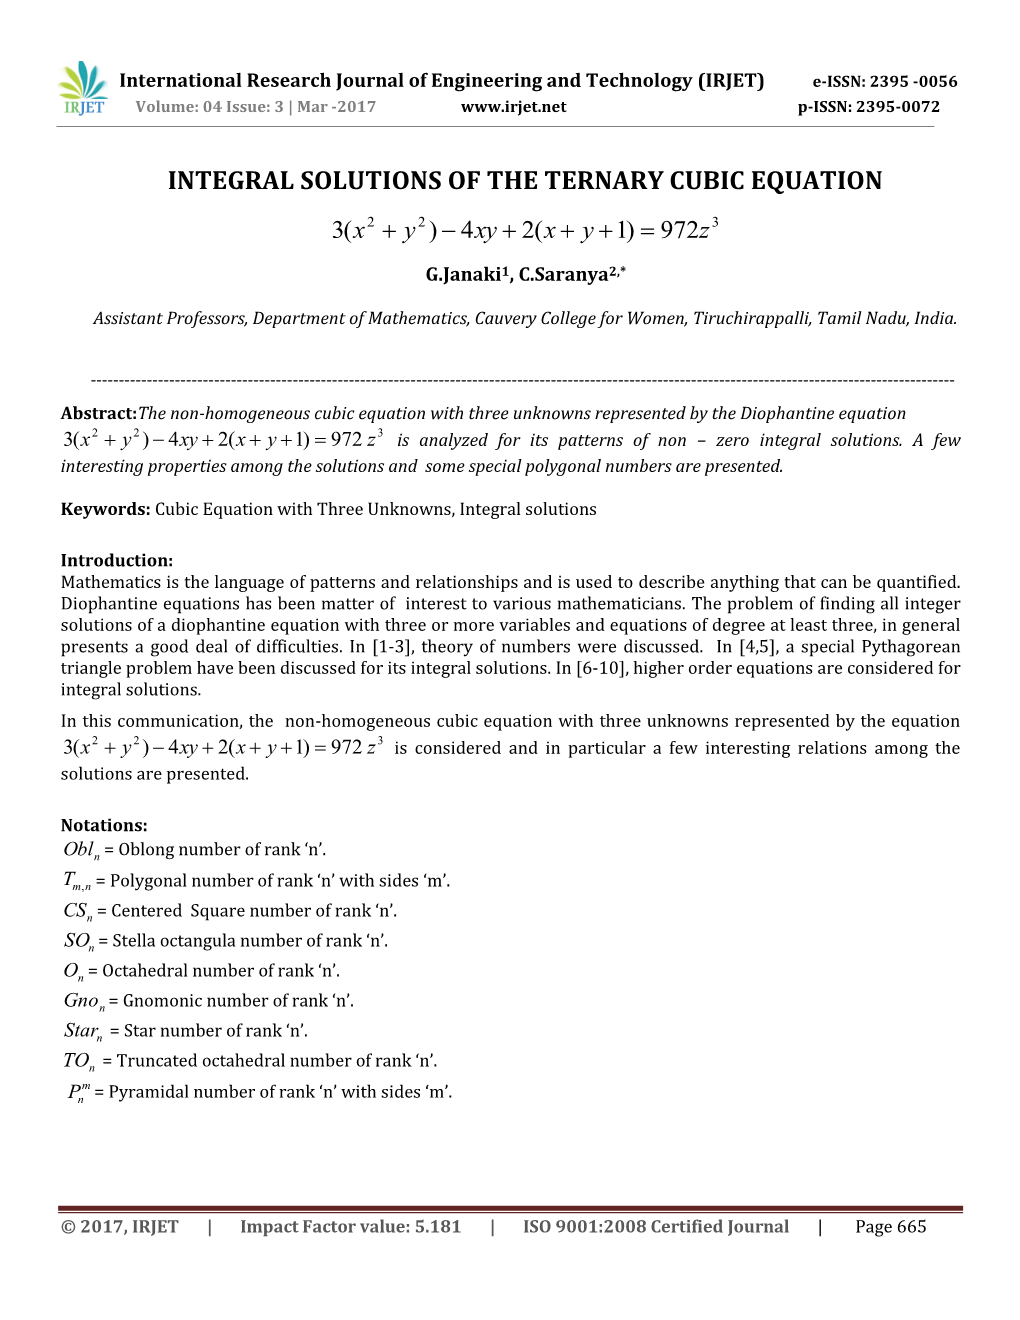 Integral Solutions of the Ternary Cubic Equation